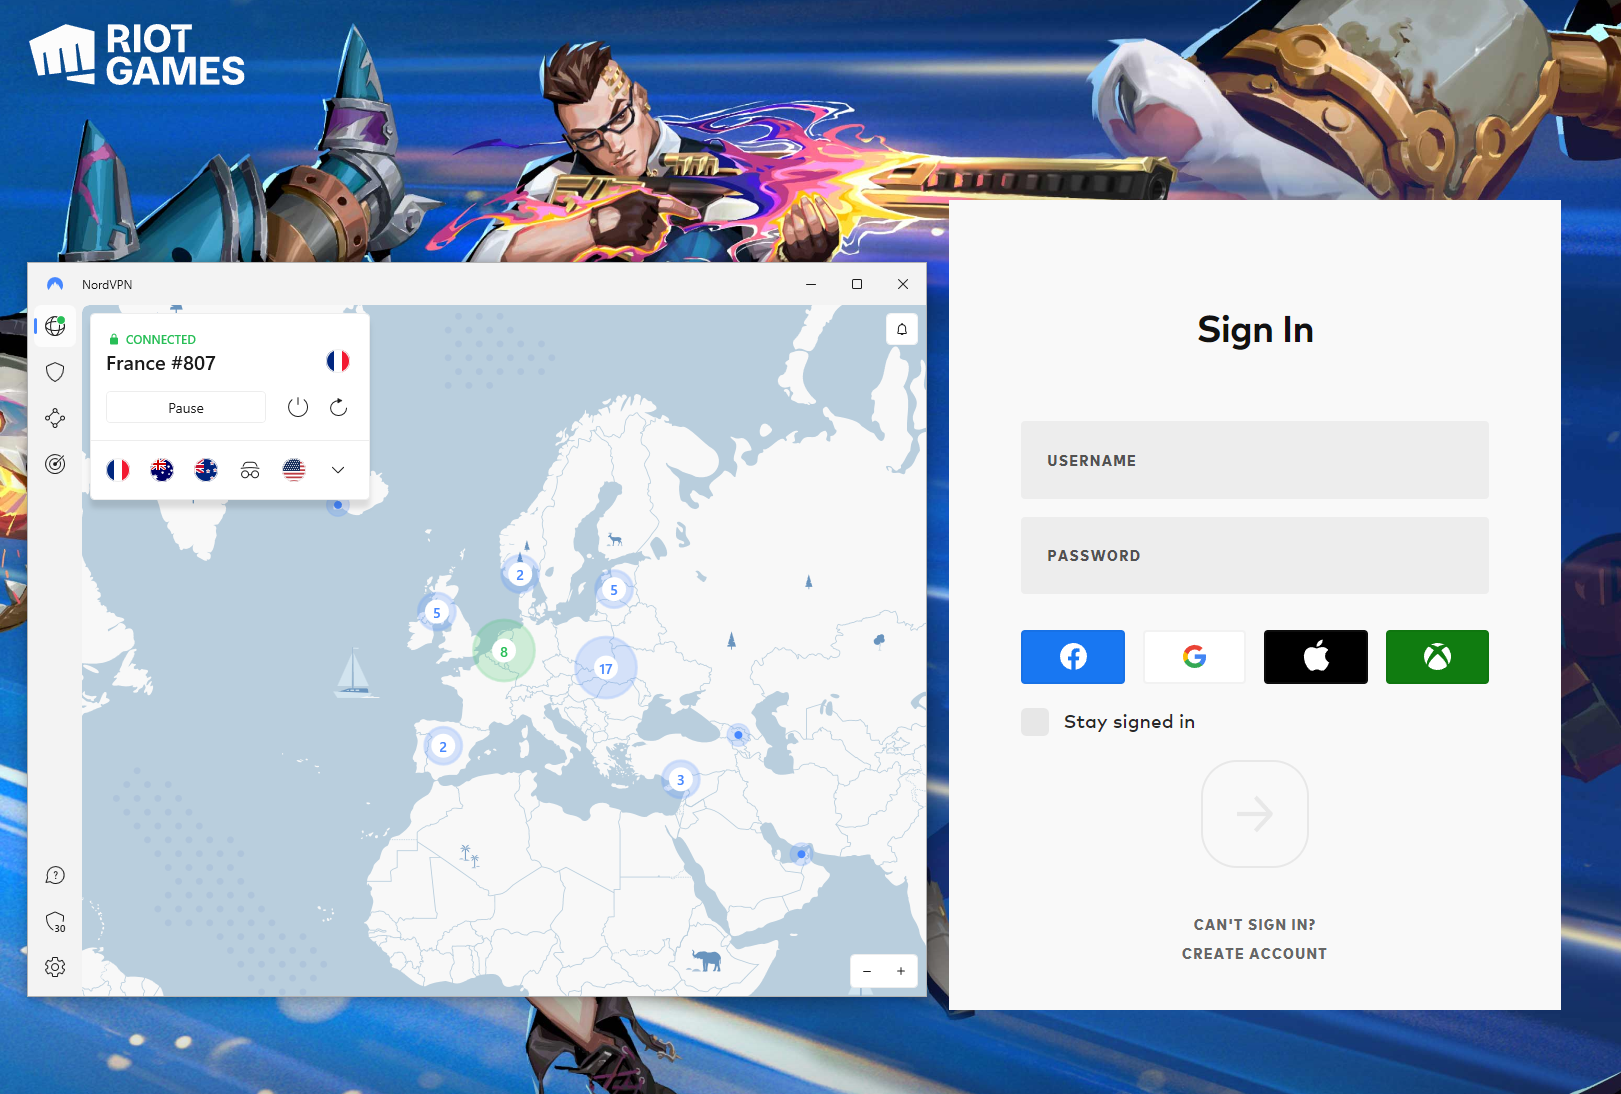 Log in to Riot Games account while connected to NordVPN